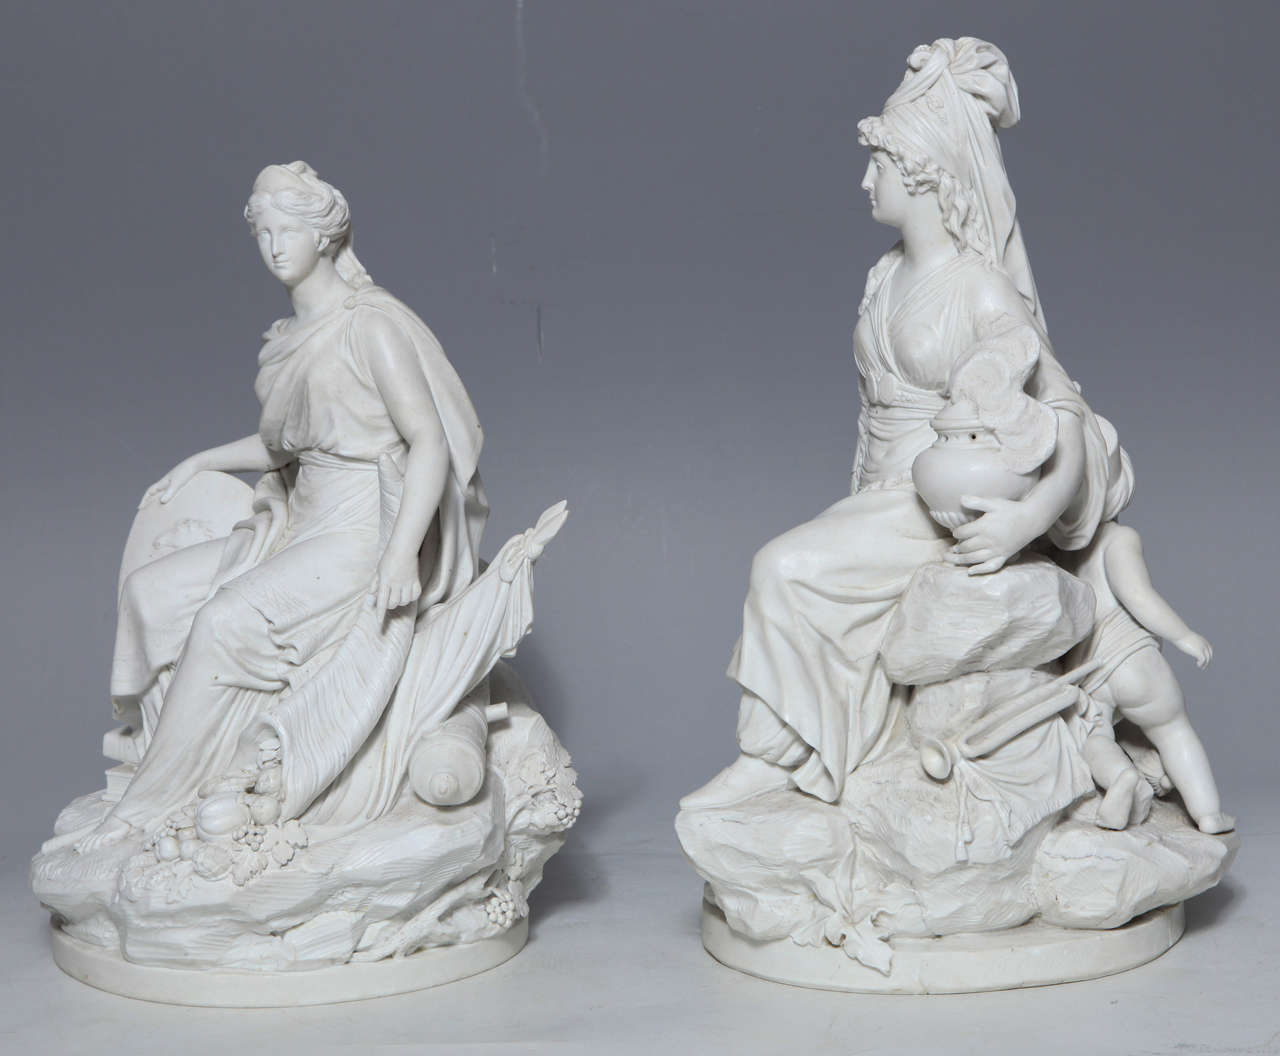 Pair of Sevres Biscuit porcelain allegorical figures of the continents, here Asia and Europe, emblematic of the Four Corners of the World. After the 1791 models by Simon-Louis Boizot. 

The figure on the left is the personification of Europe. She